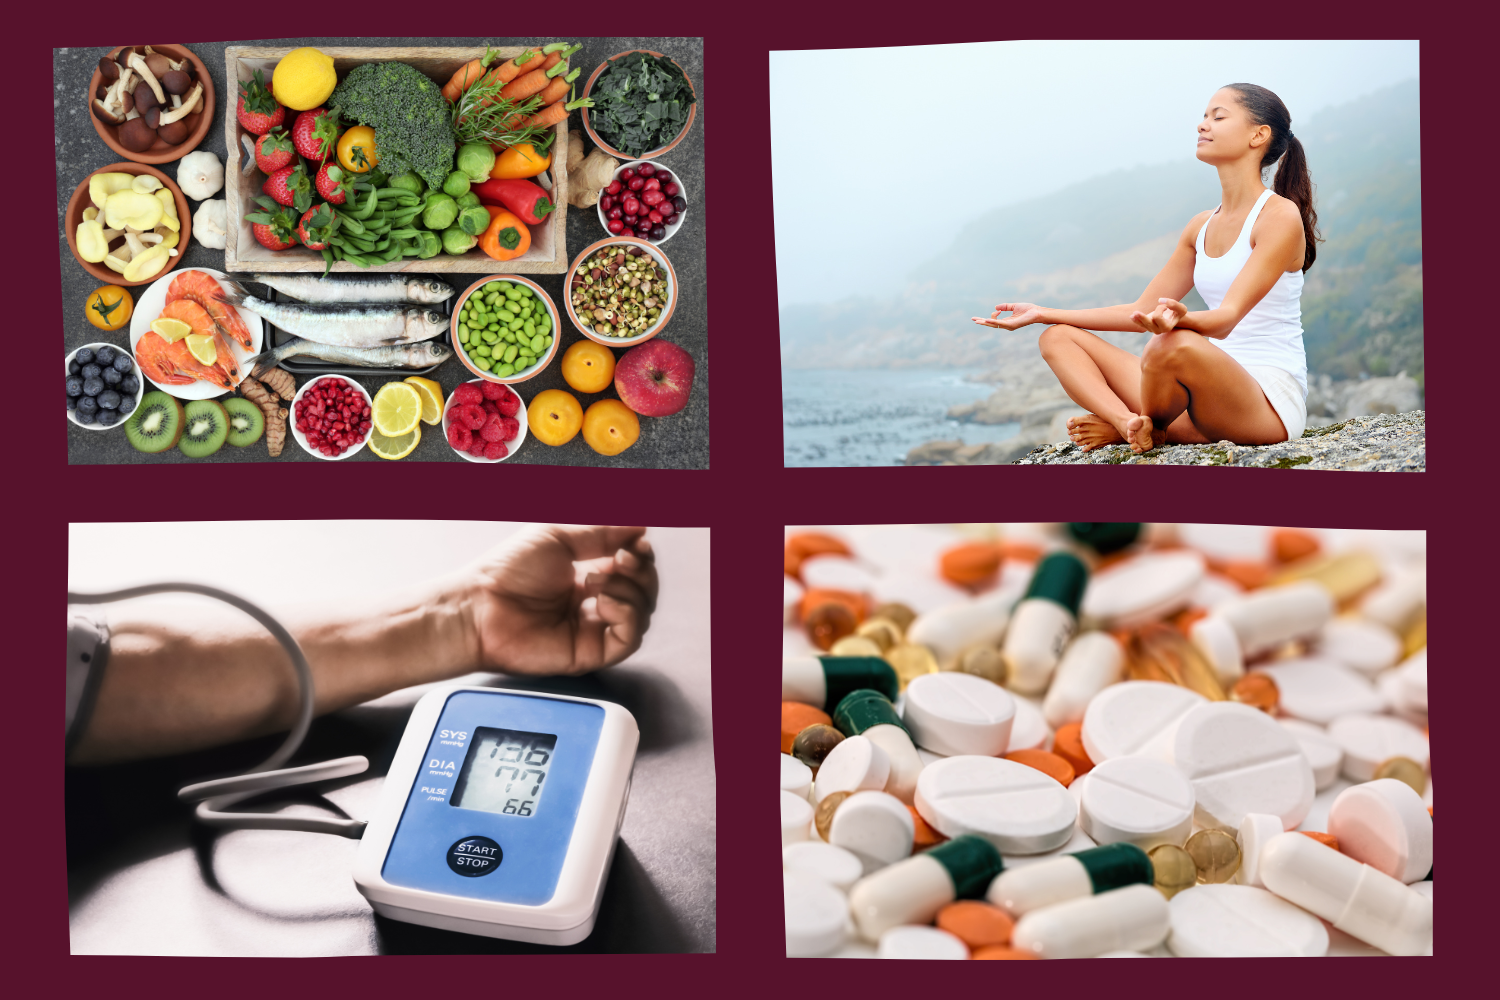 Healthy food, woman meditating outside, checking blood pressure and various medications on a table.